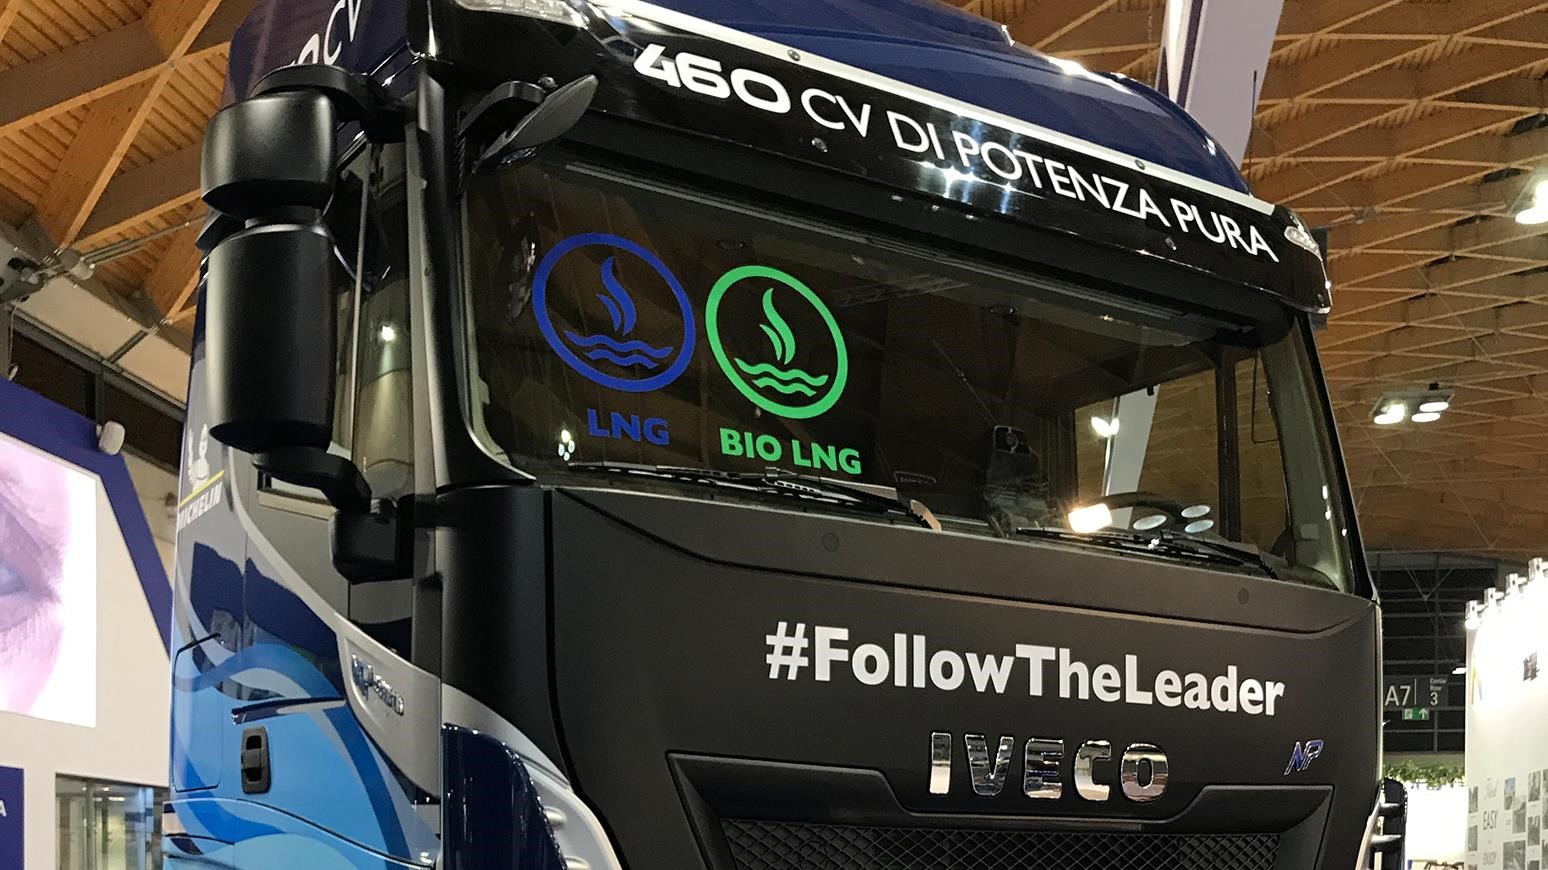 IVECO Stralis NP 460 Named Sustainable Truck Of The Year 2019 At Ecomondo 2018